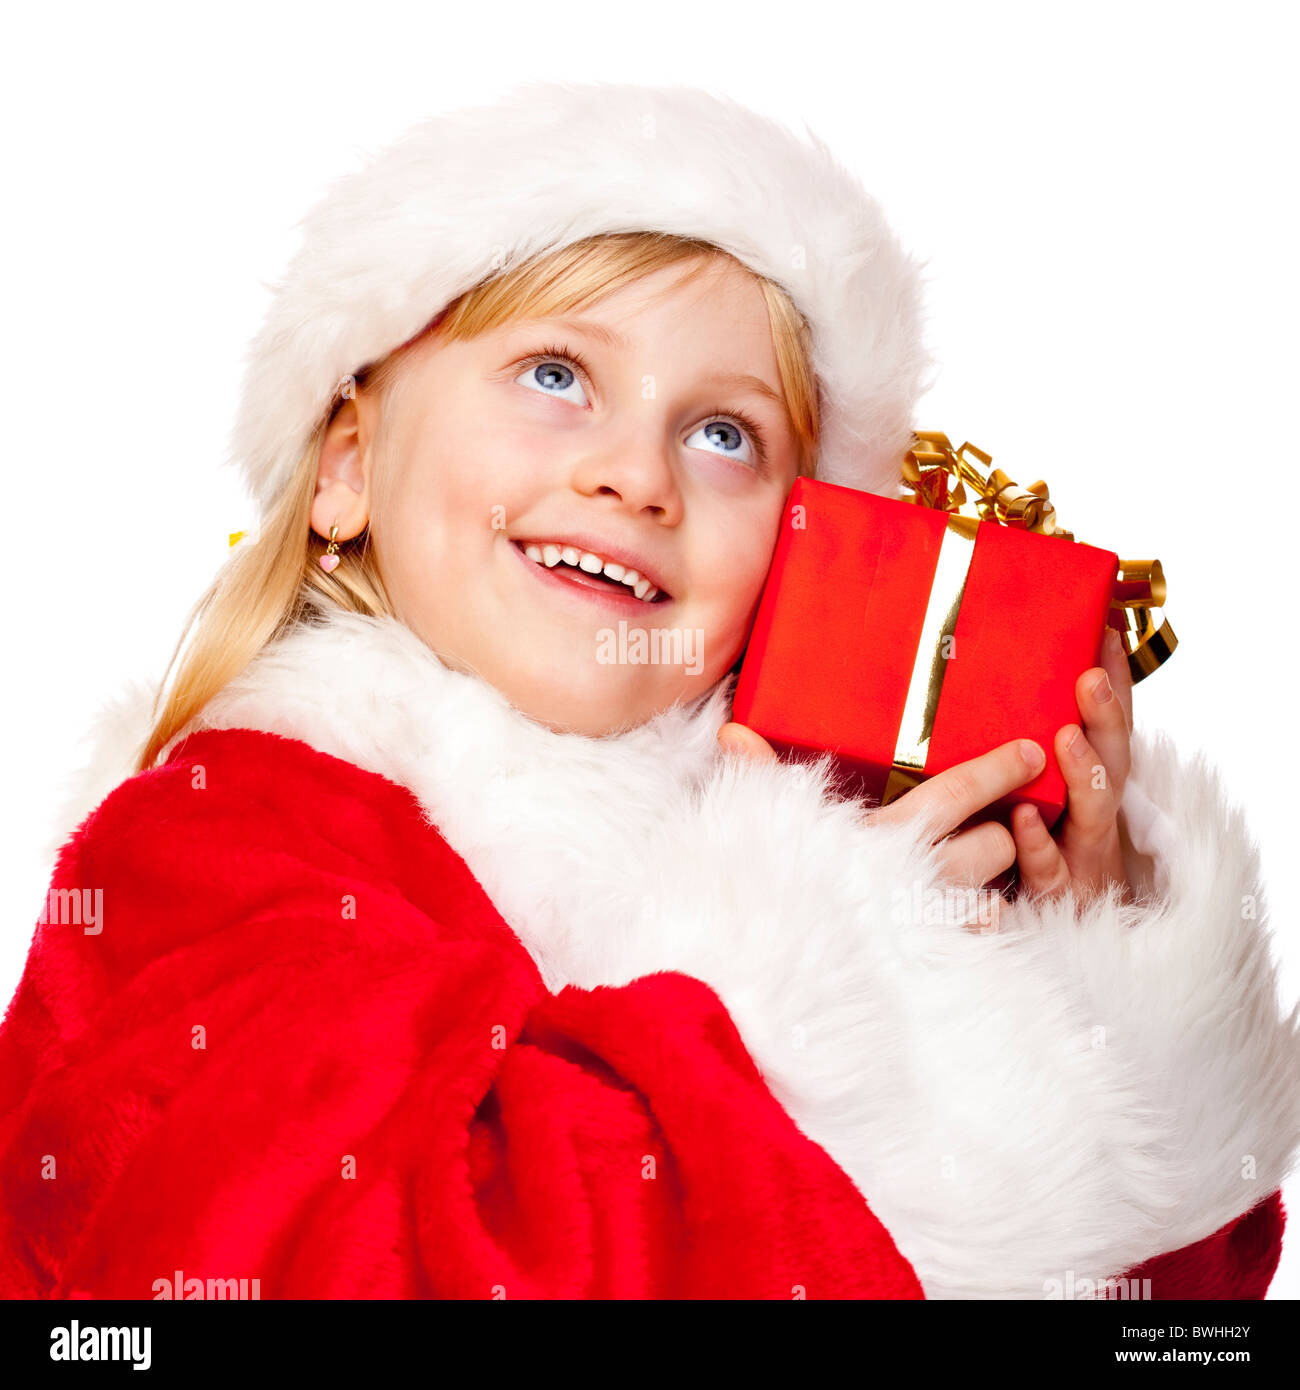 Young happy girl dressed as Santa Claus holds Christmas gift in hands.  Isolated on white background. Stock Photo